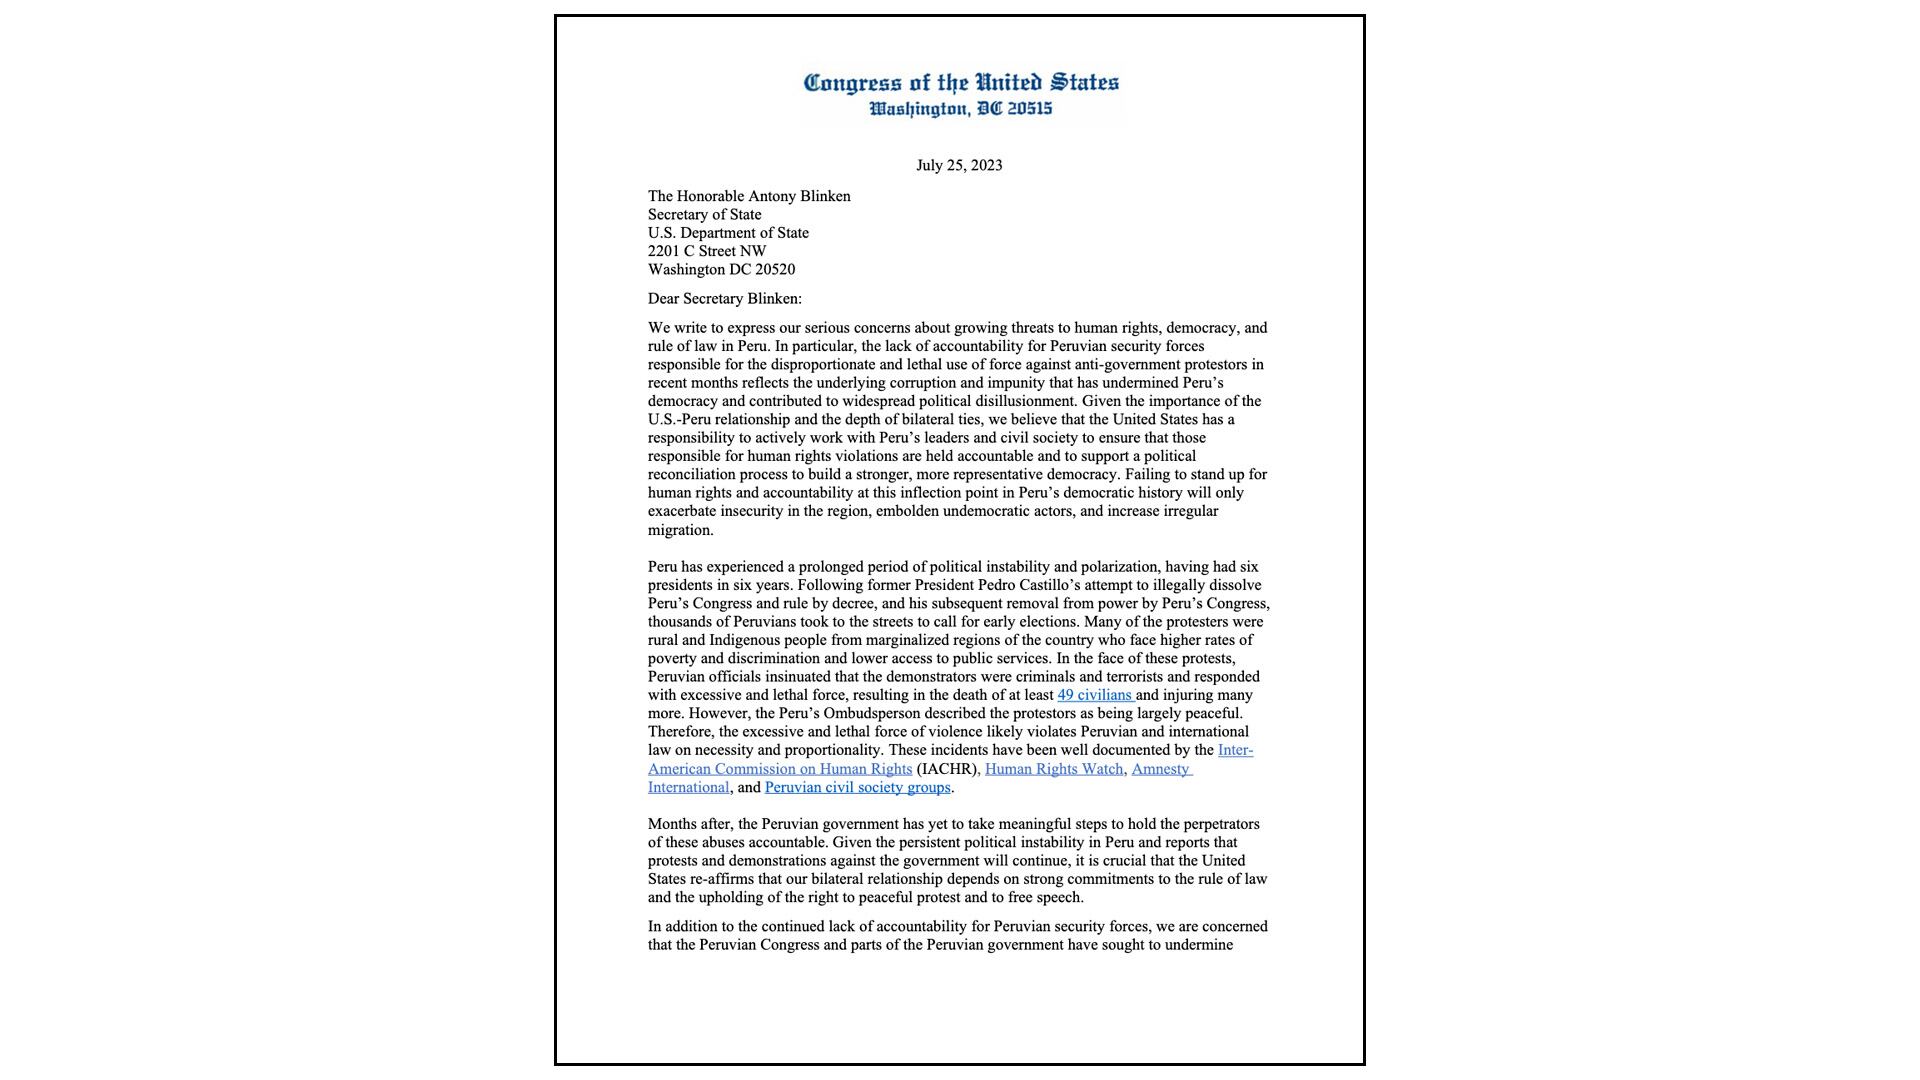 The first page of the letter from the group of Democratic congresspeople to Secretary of State Antony Blinken.